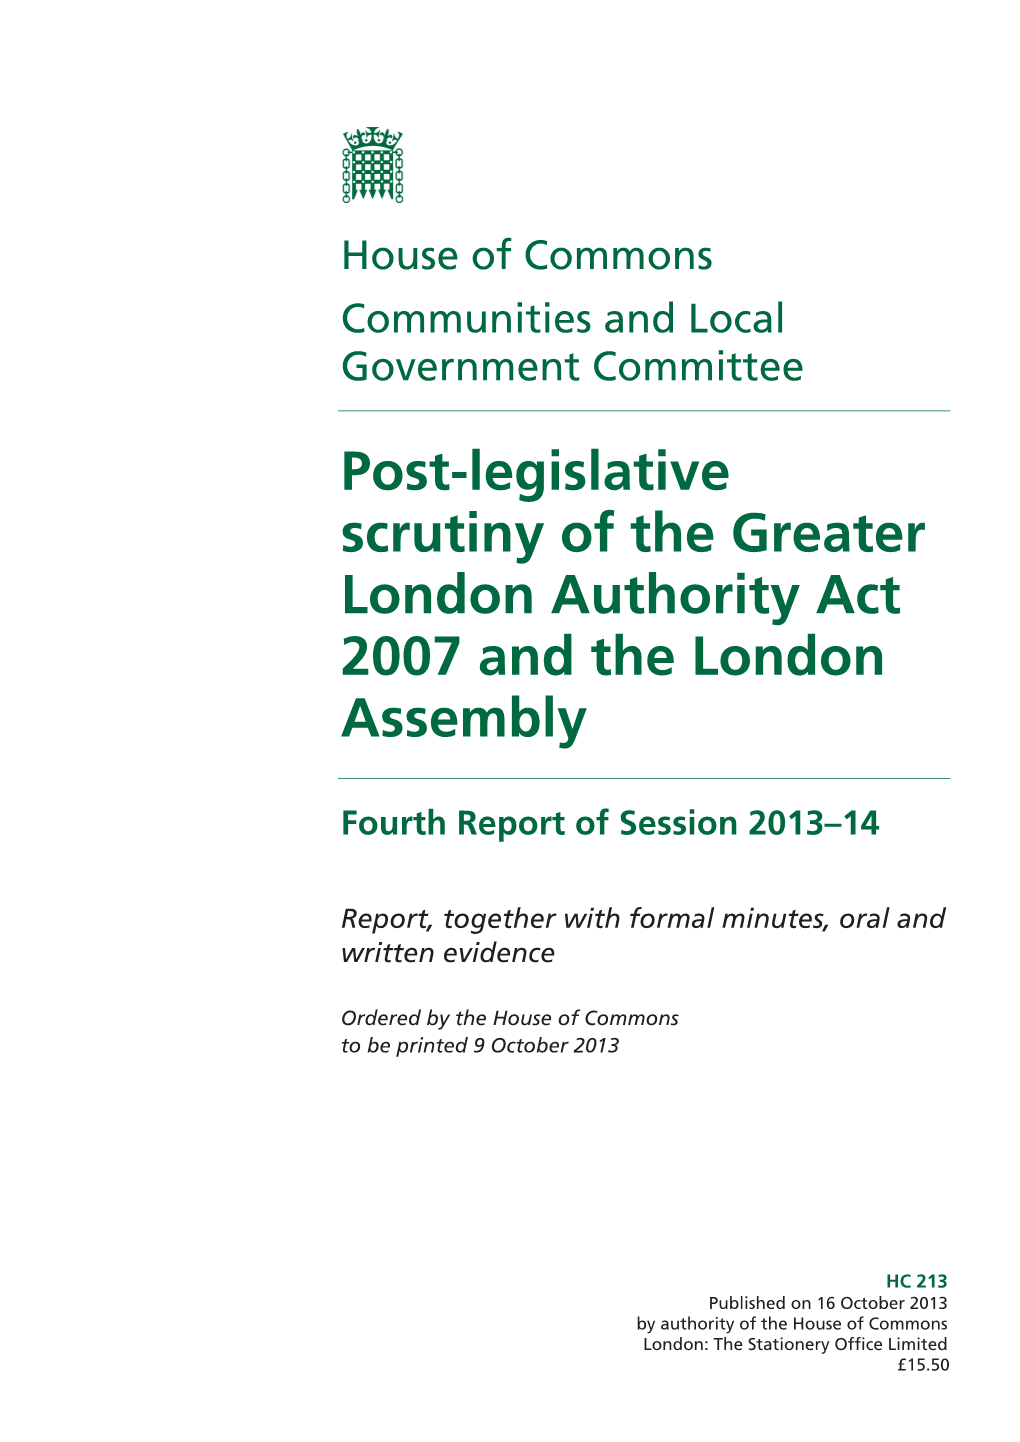 Post-Legislative Scrutiny of the Greater London Authority Act 2007 and the London Assembly